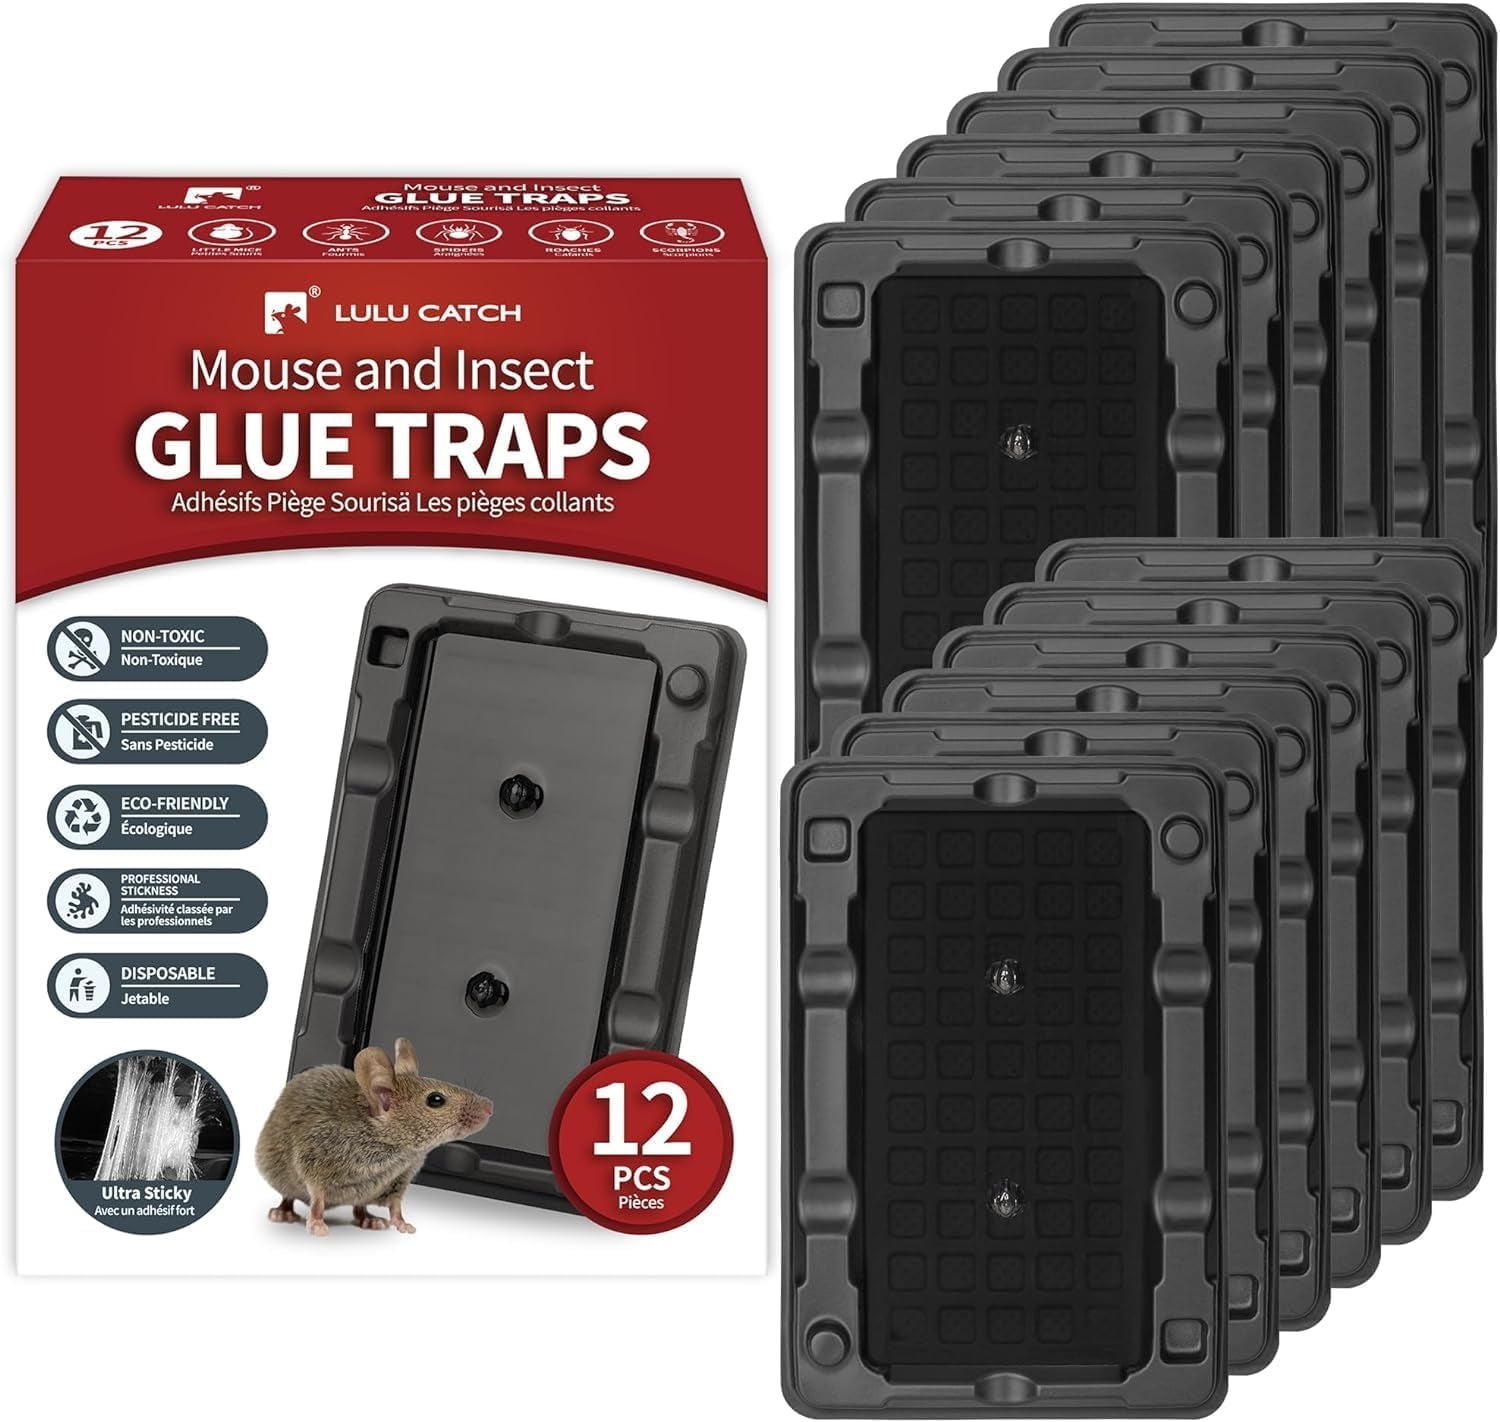 How to maintain and clean reusable mouse traps?